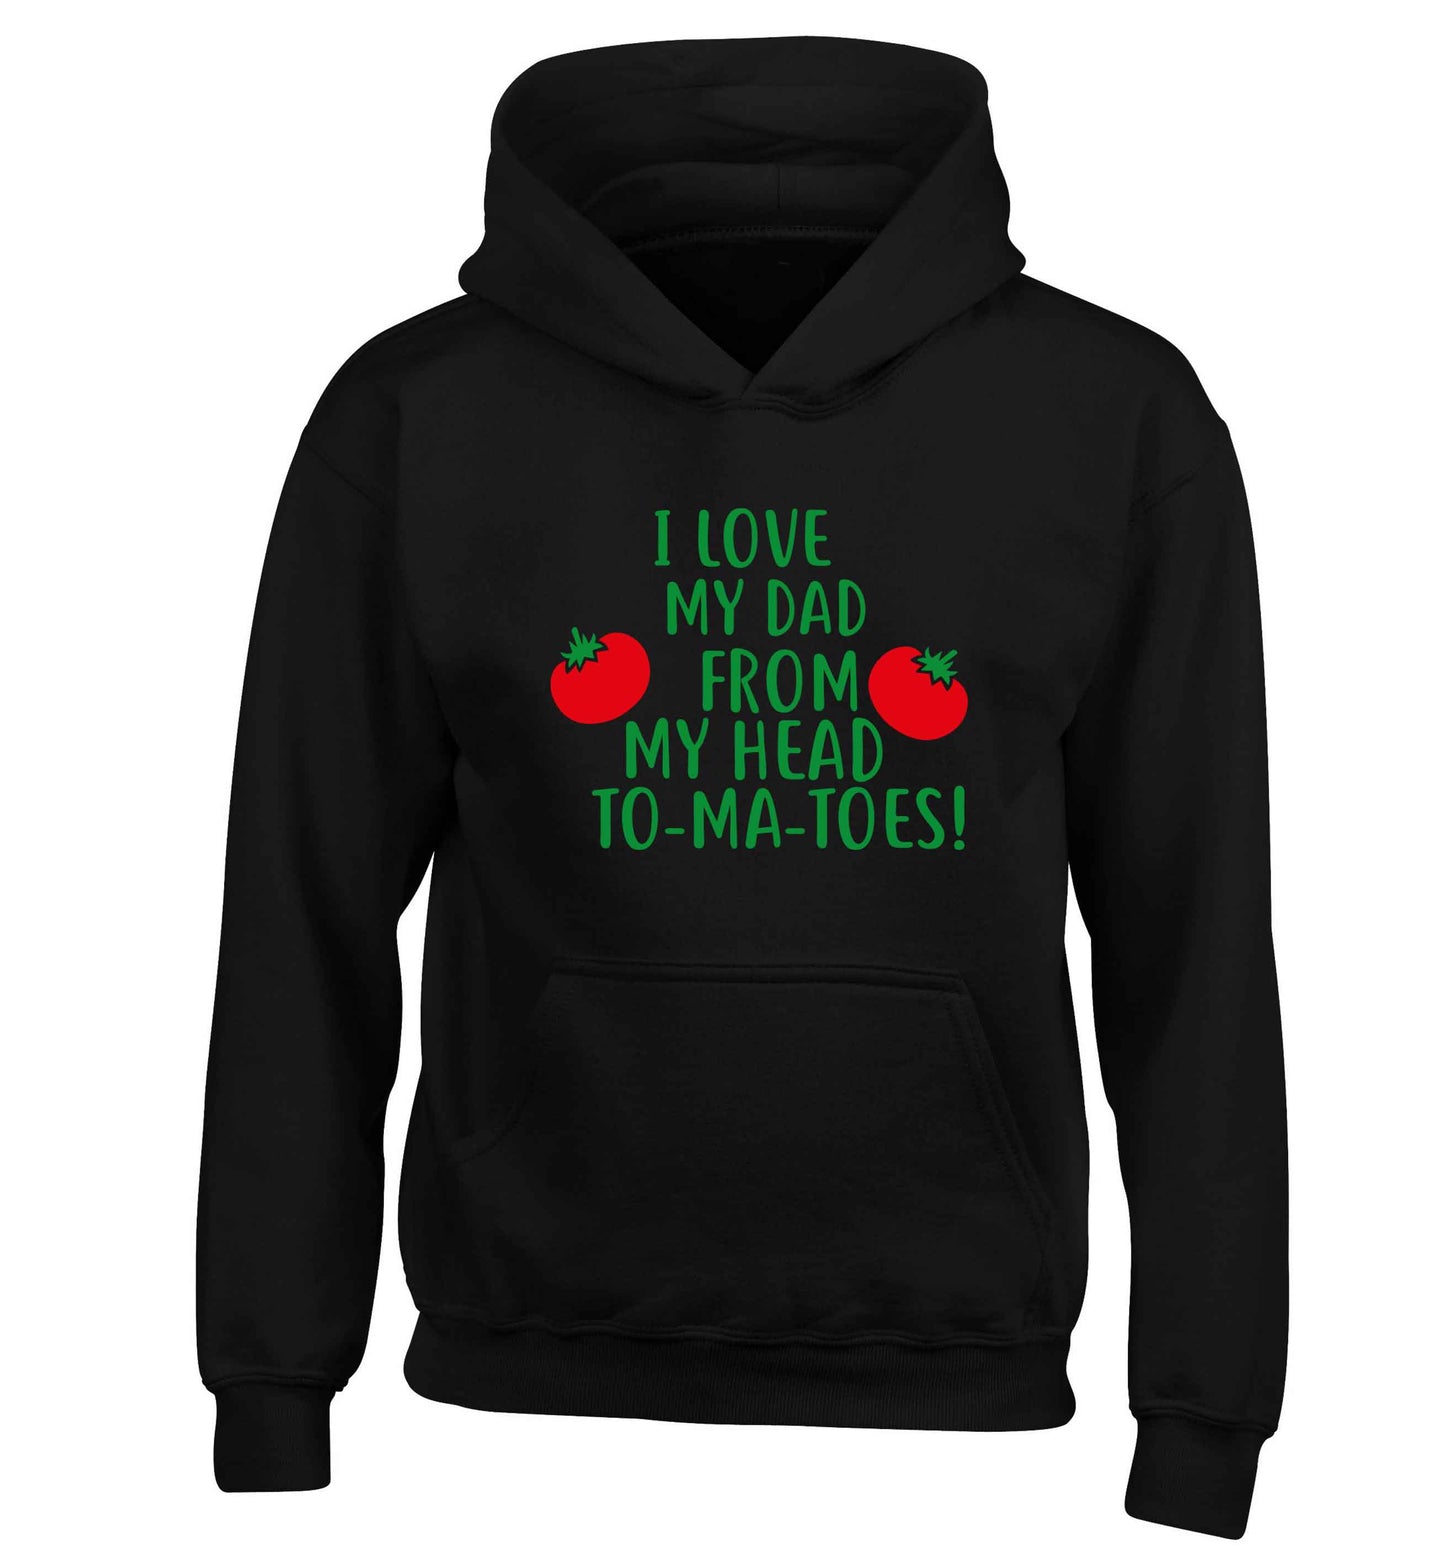 I love my dad from my head to-ma-toes children's black hoodie 12-13 Years